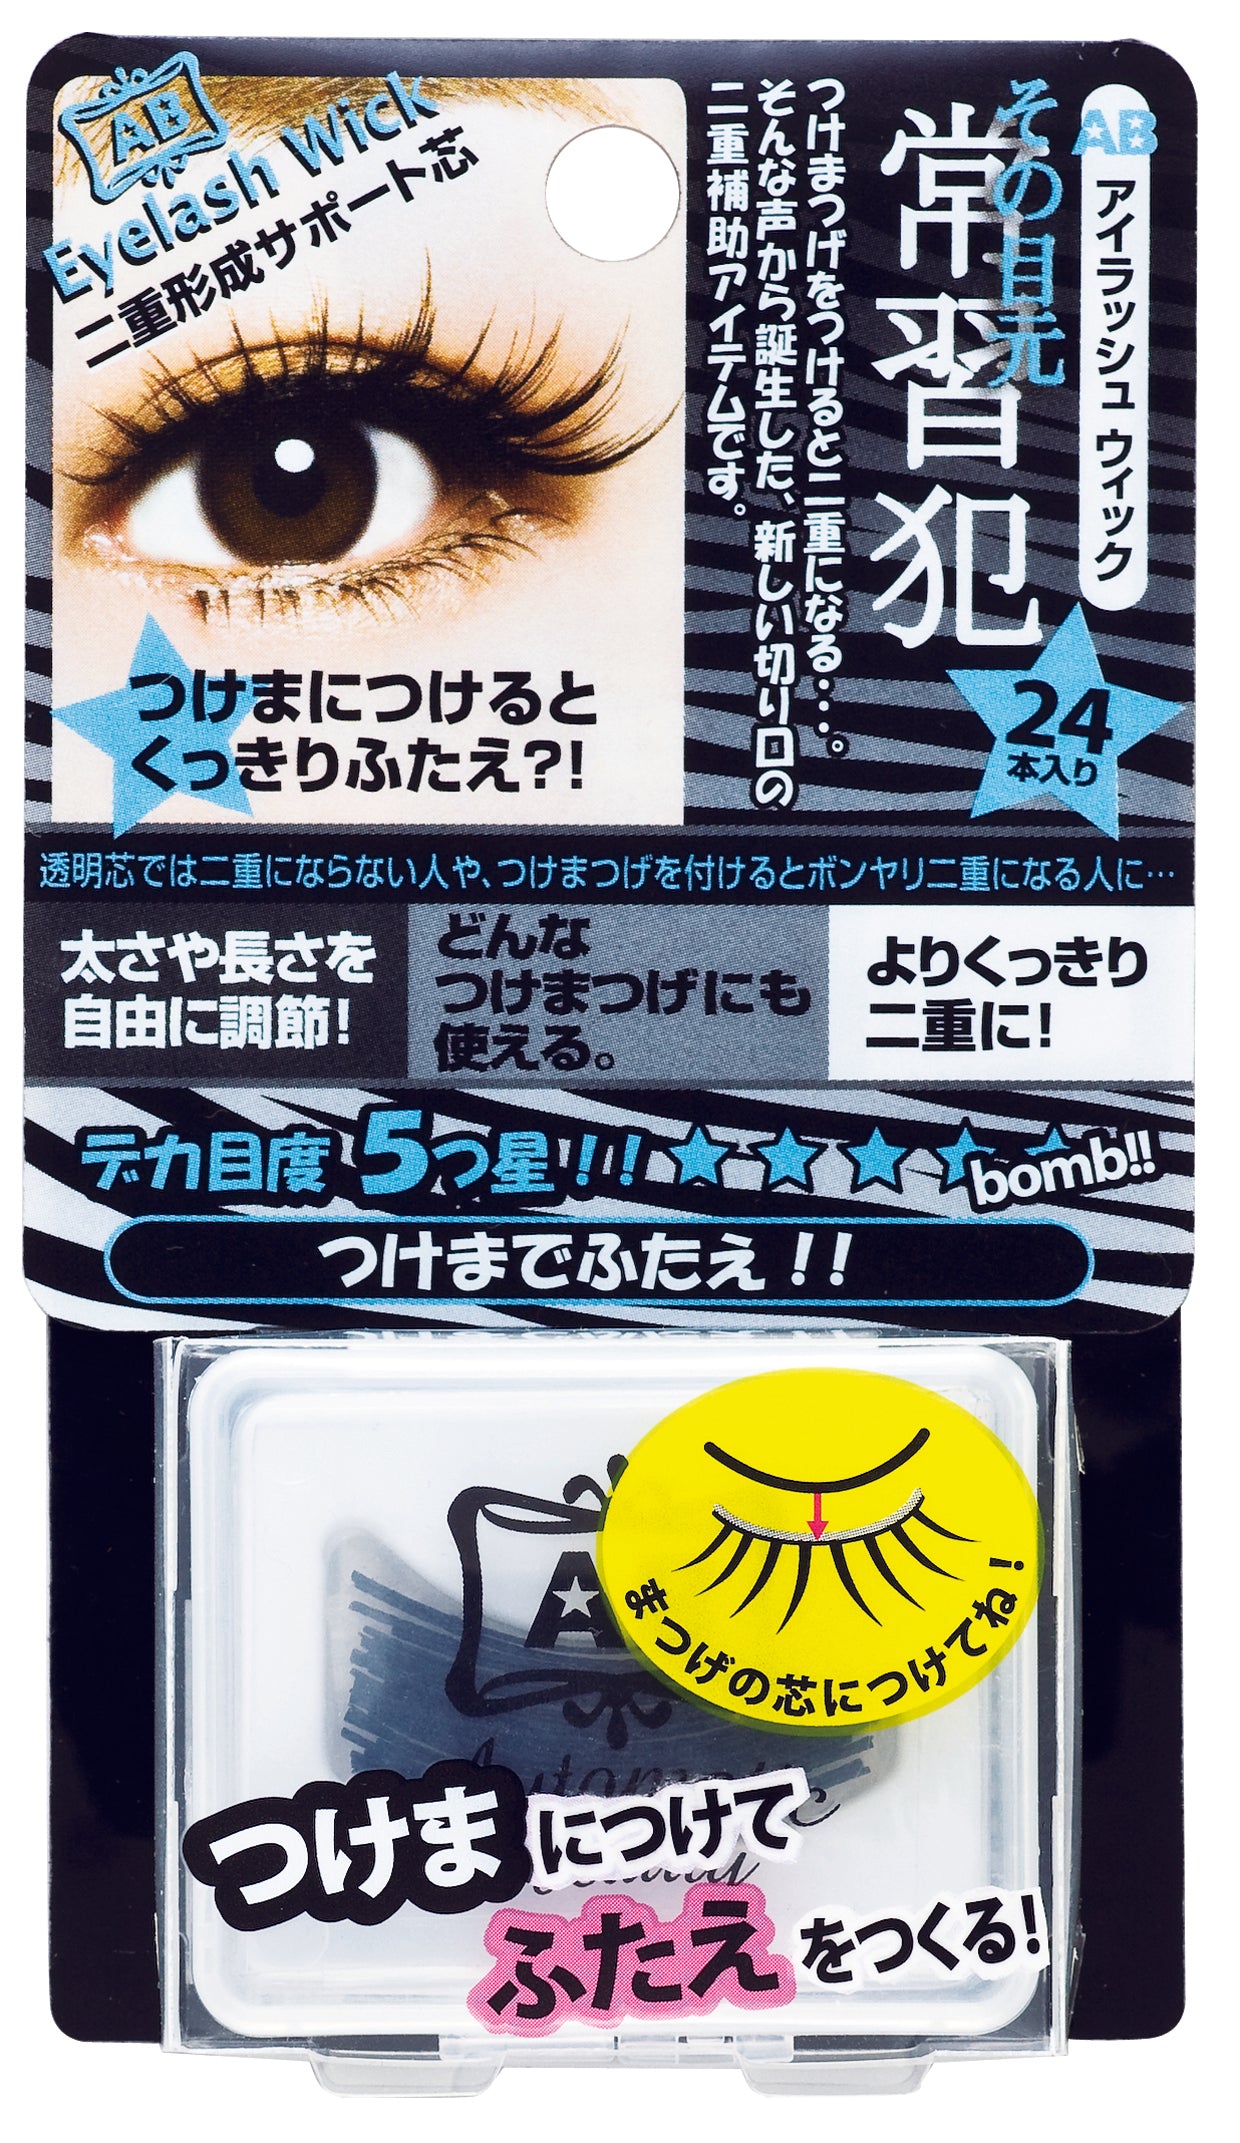 [CLEARANCE] Automatic Beauty Eyelid Tapes - 2019 edition